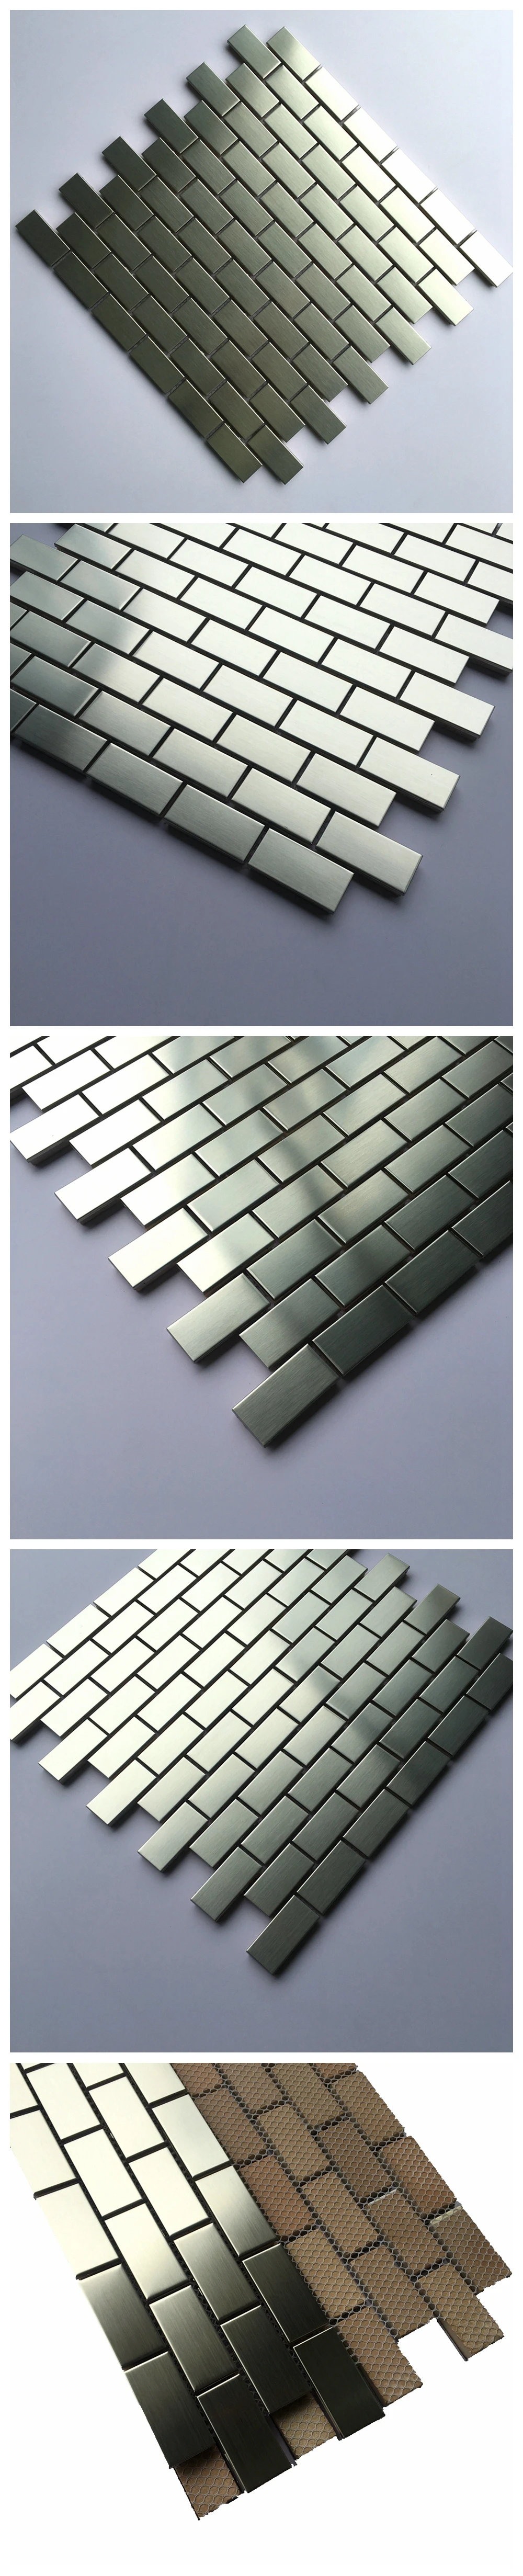 Hot selling Matt Metal Mosaic Stainless steel Mosaic for bathroom and kitchen Foshan China